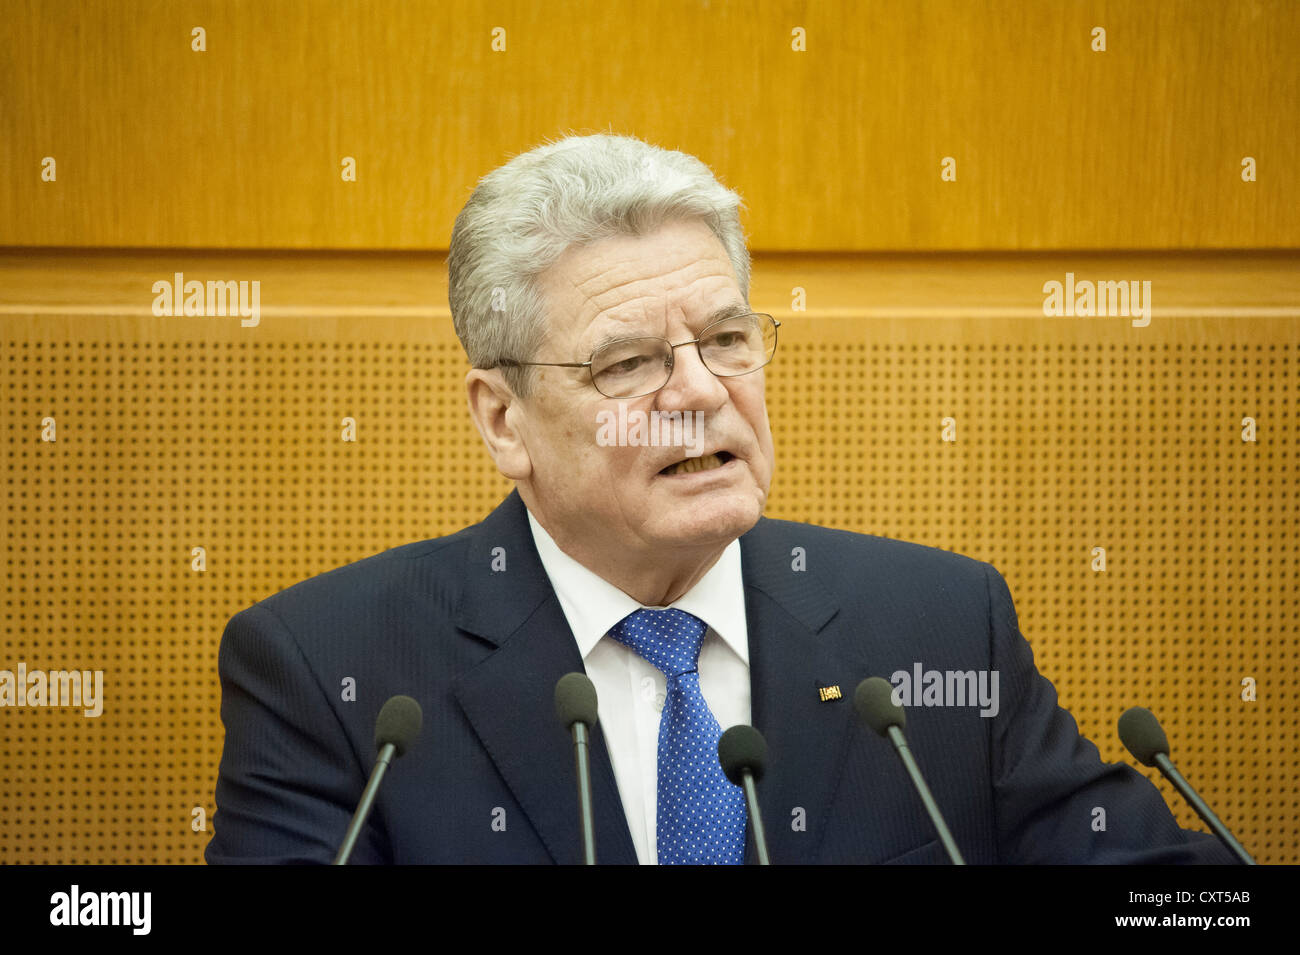 Federal President Joachim Gauck addressing the MPs in the Landtag, state parliament, inaugural visit of Federal President Stock Photo